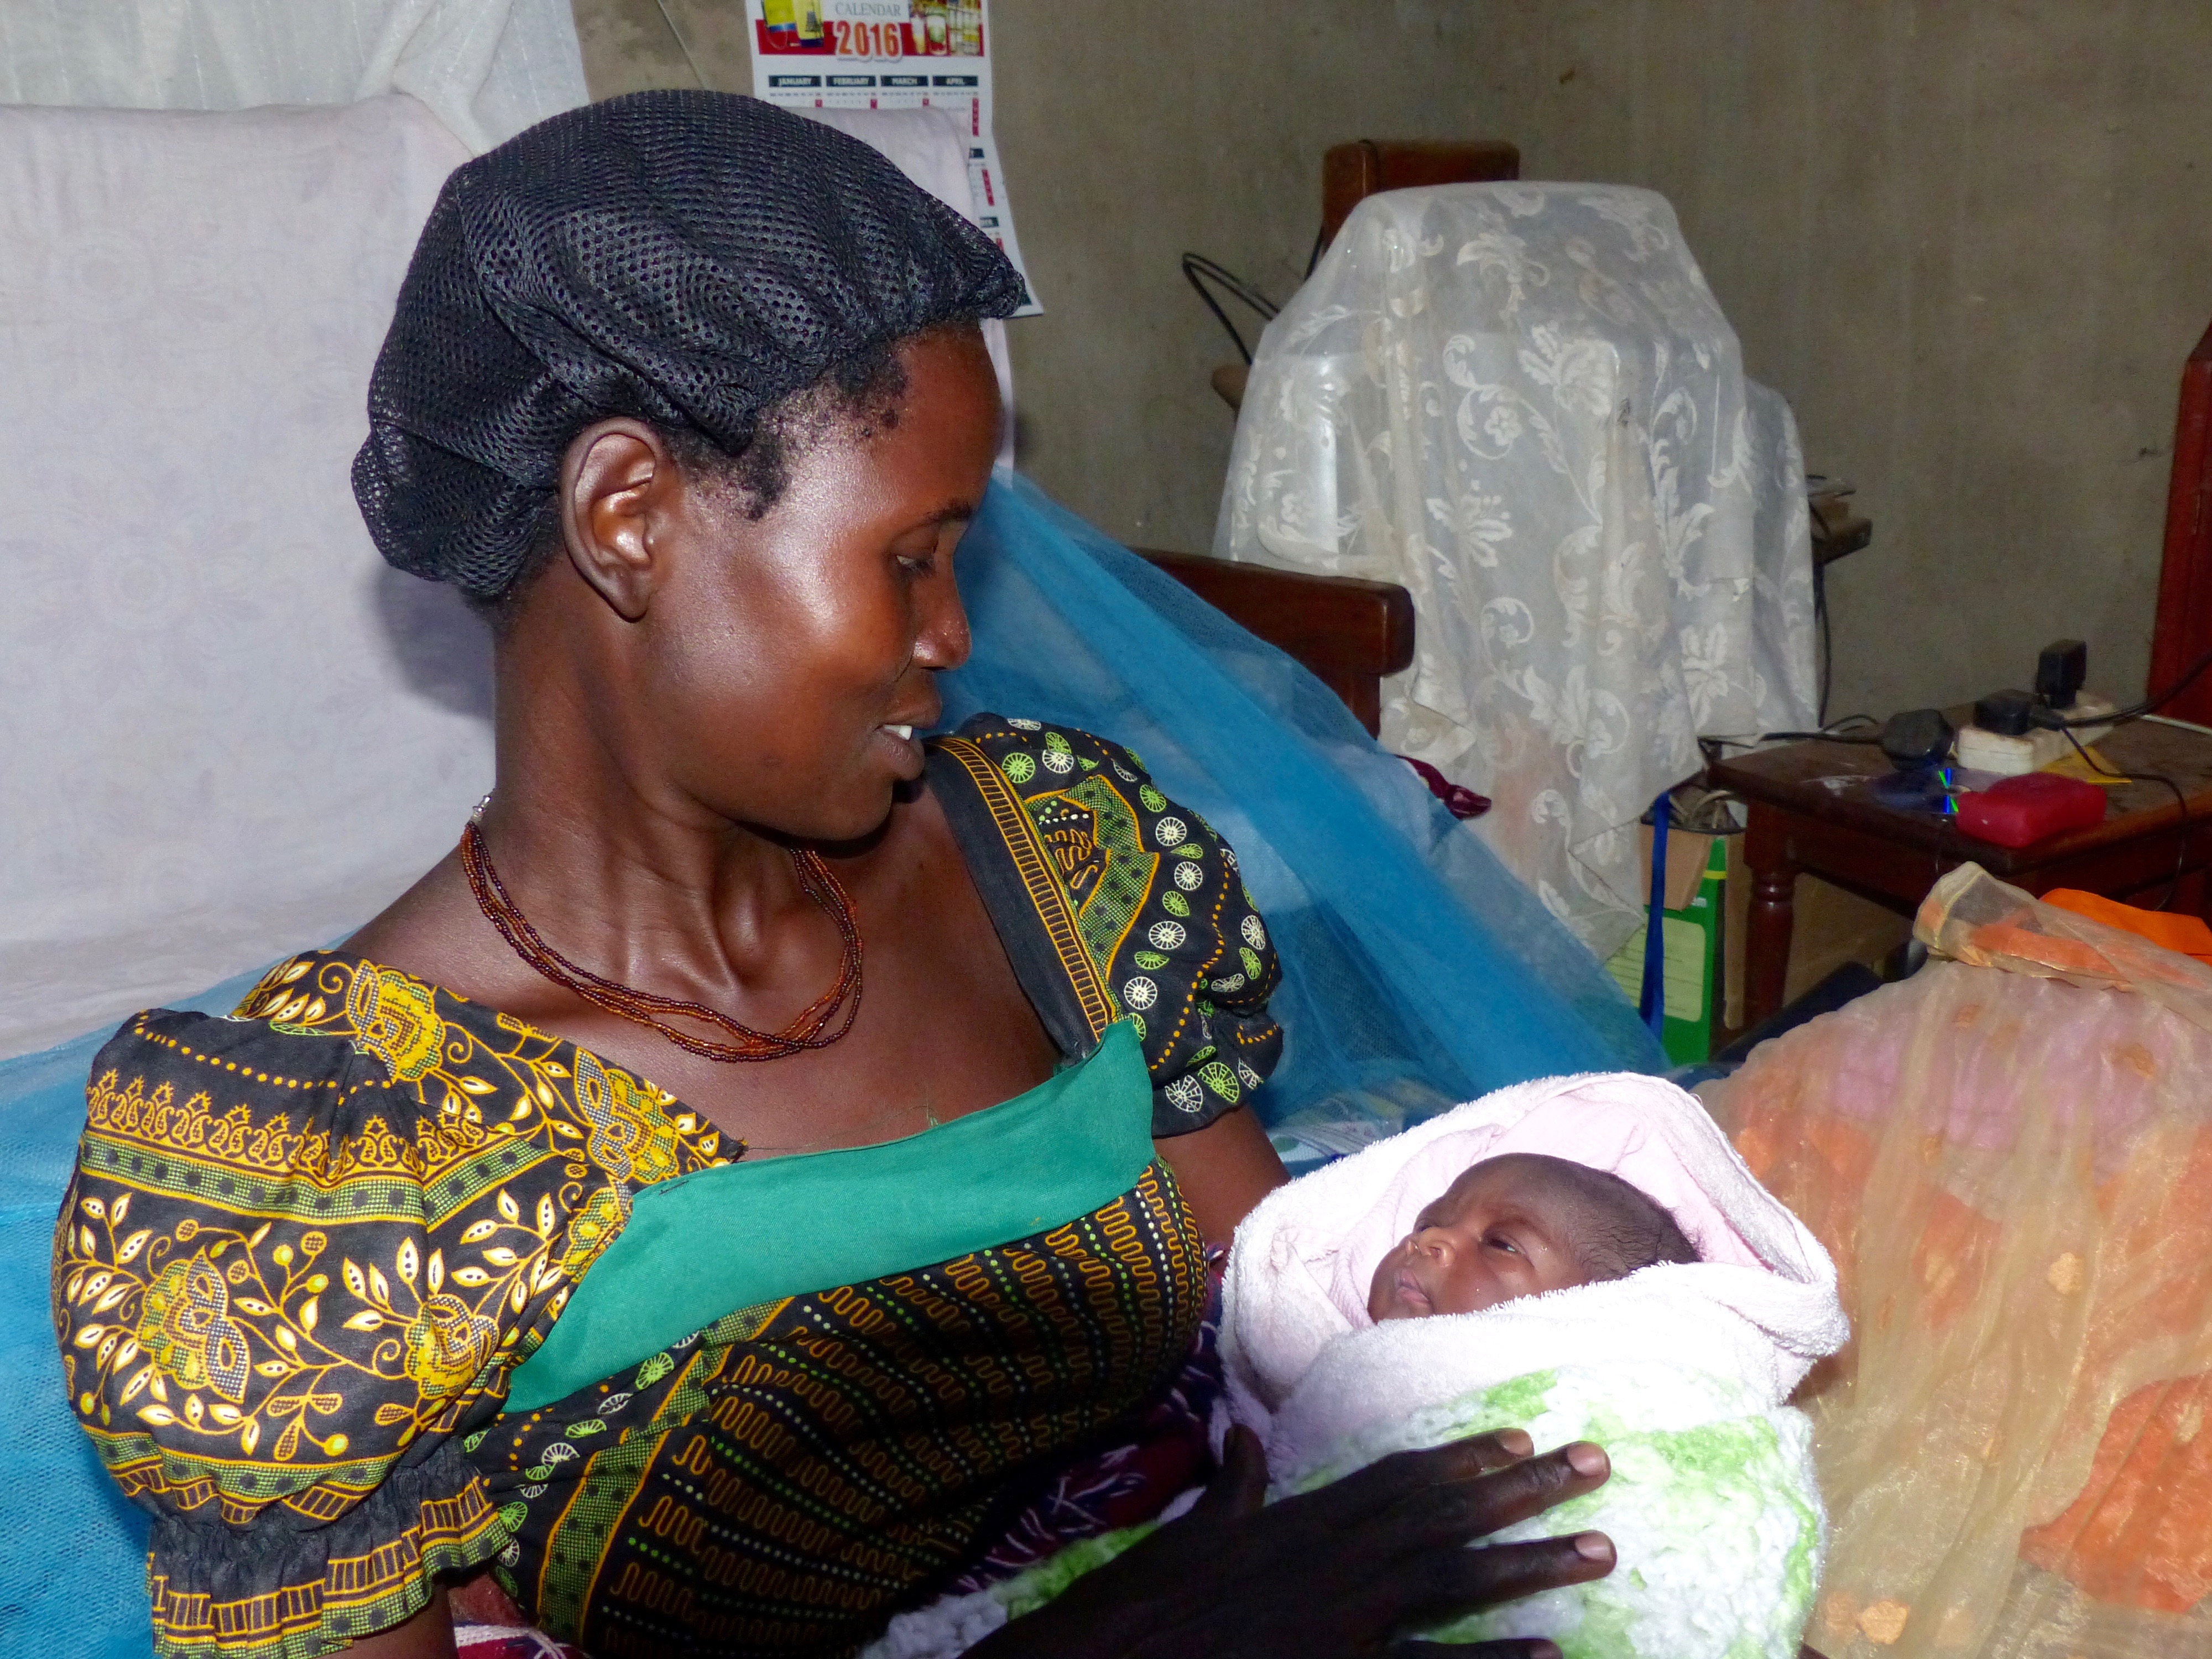 Christine, a loving mother, with her one day old baby girl, Kati